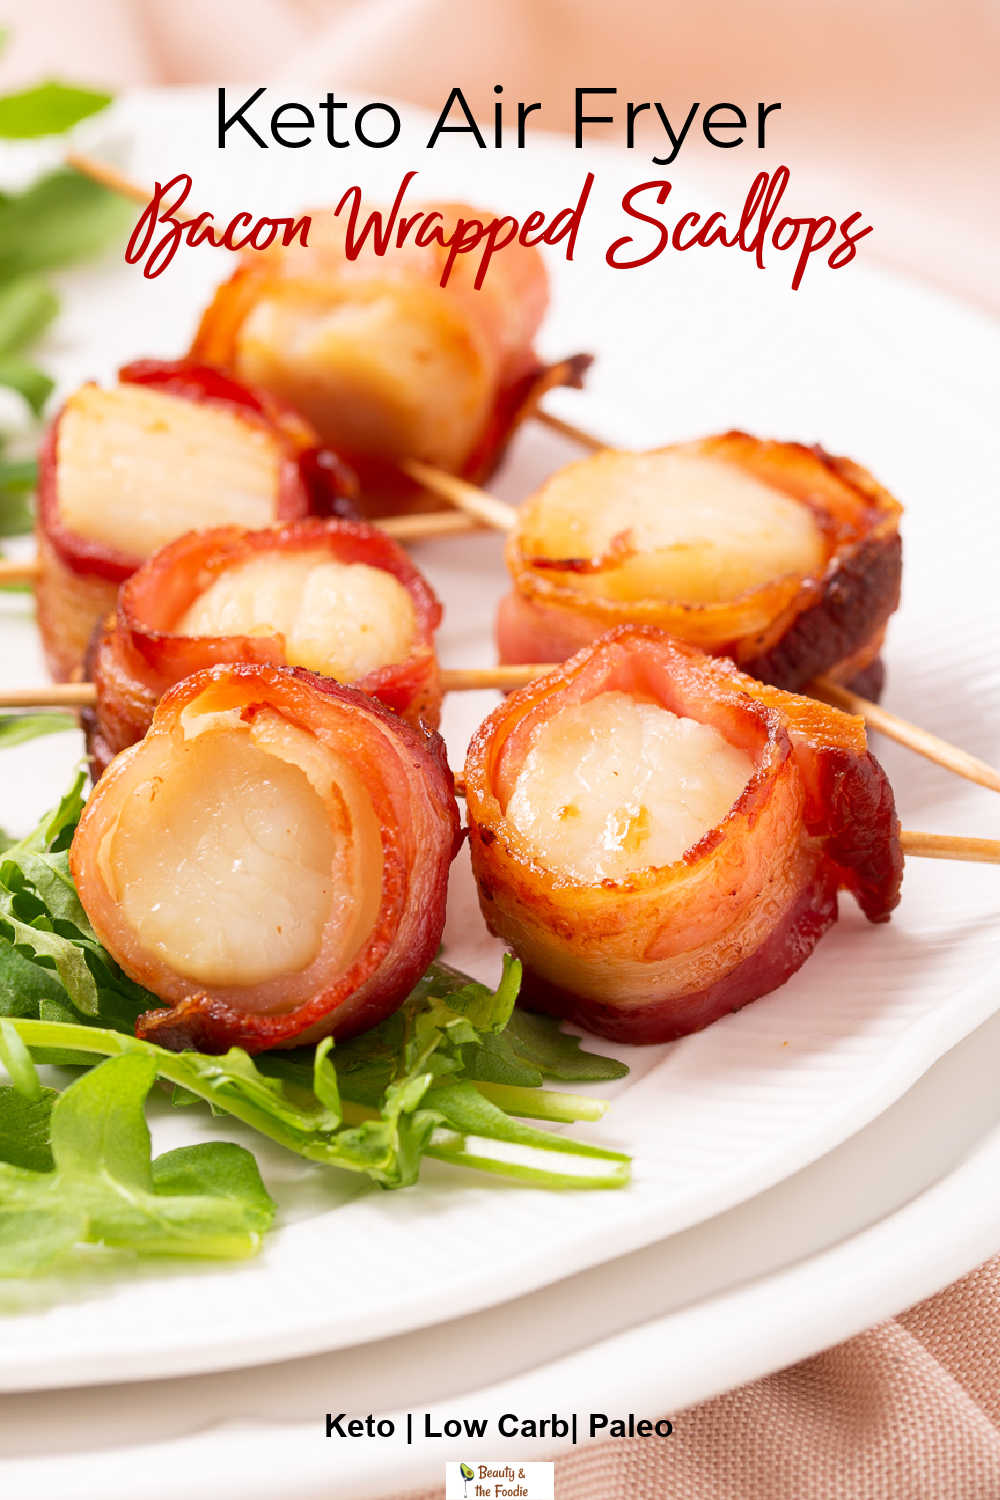 Air Fryer Bacon Wrapped Scallops with baby arugula leaves.